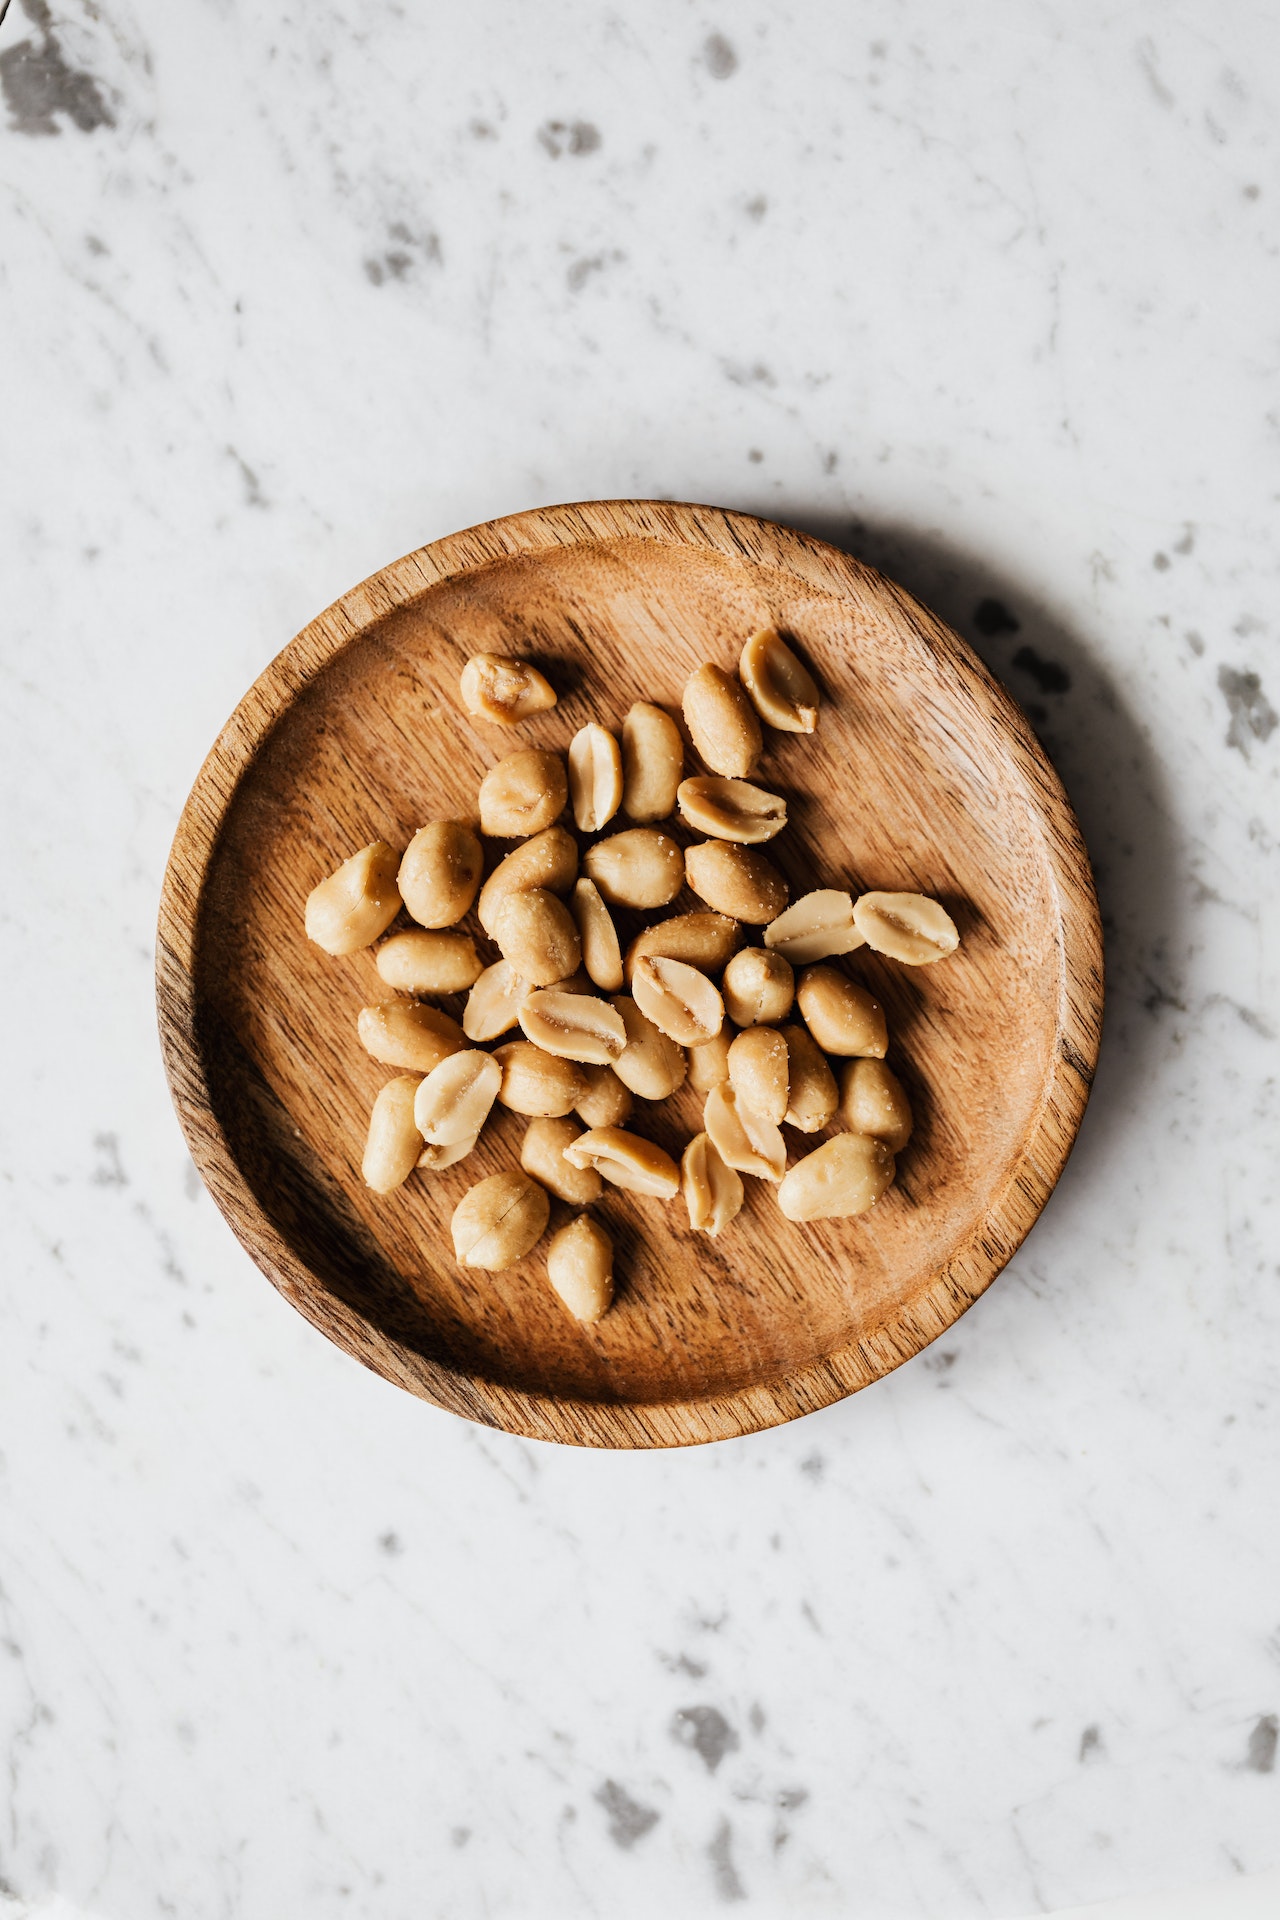 Peanuts are also healthy snacks for kids